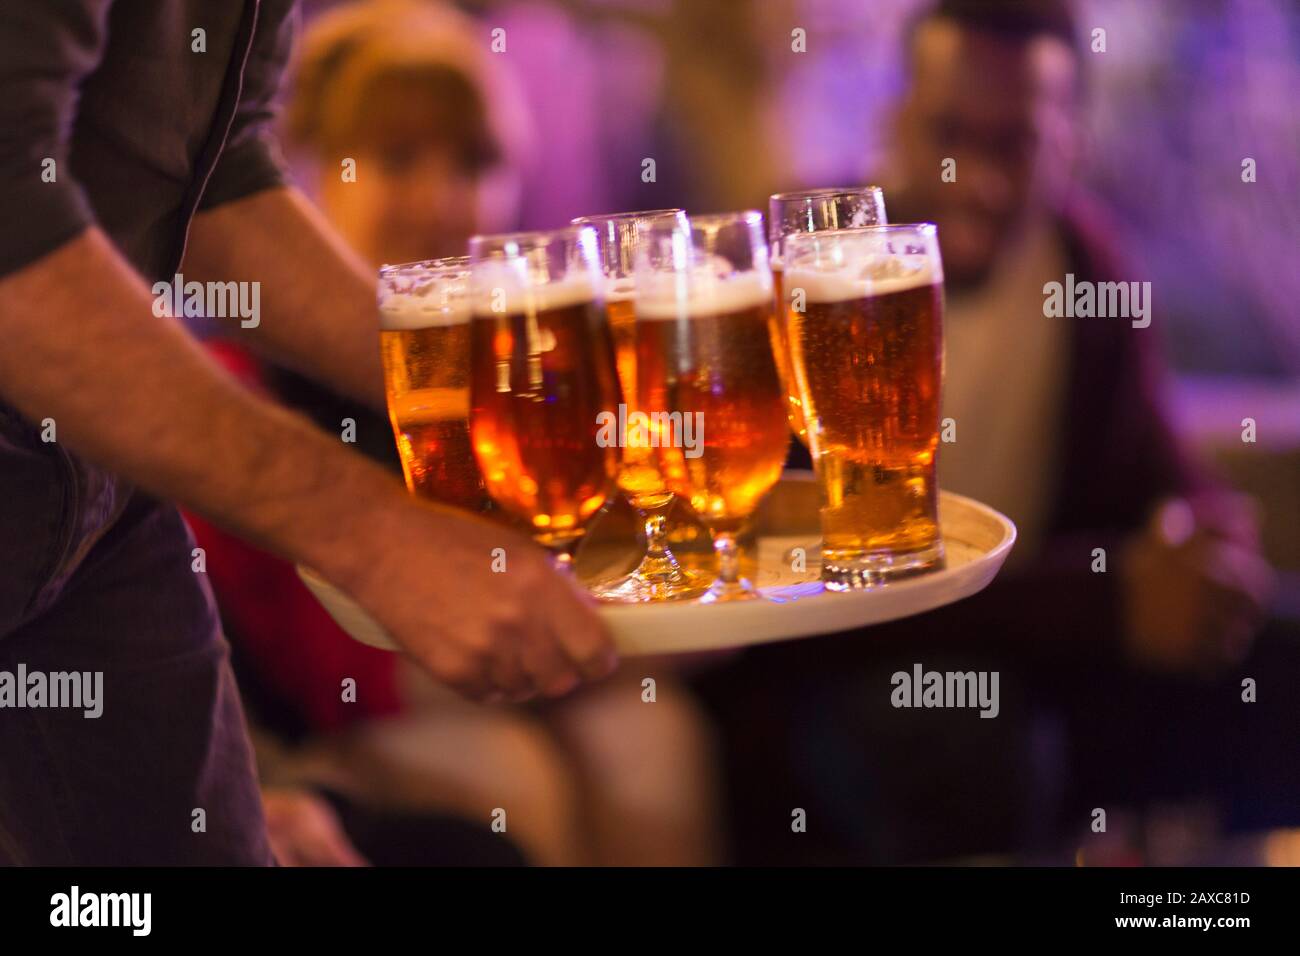 Man serving tray of beers to friends Stock Photo